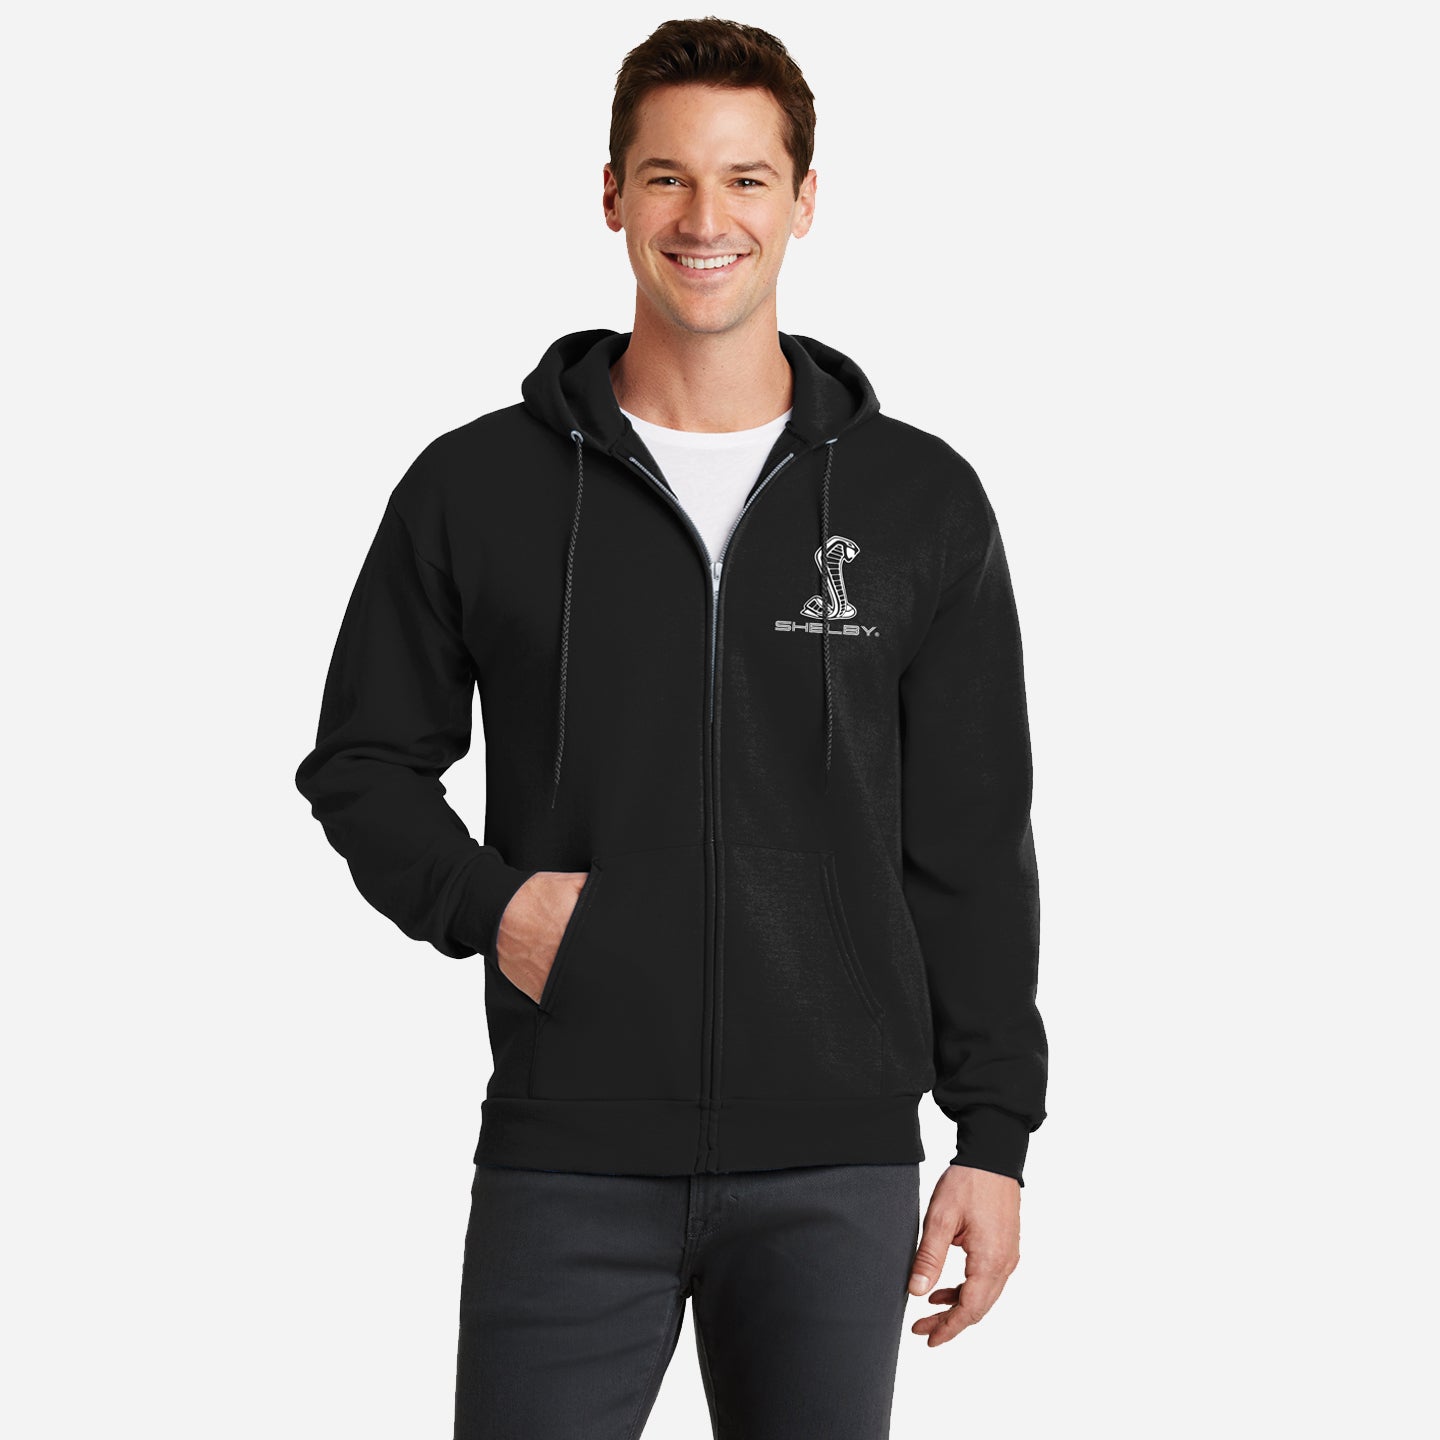 Meant to be Driven - Zippered Hoodie